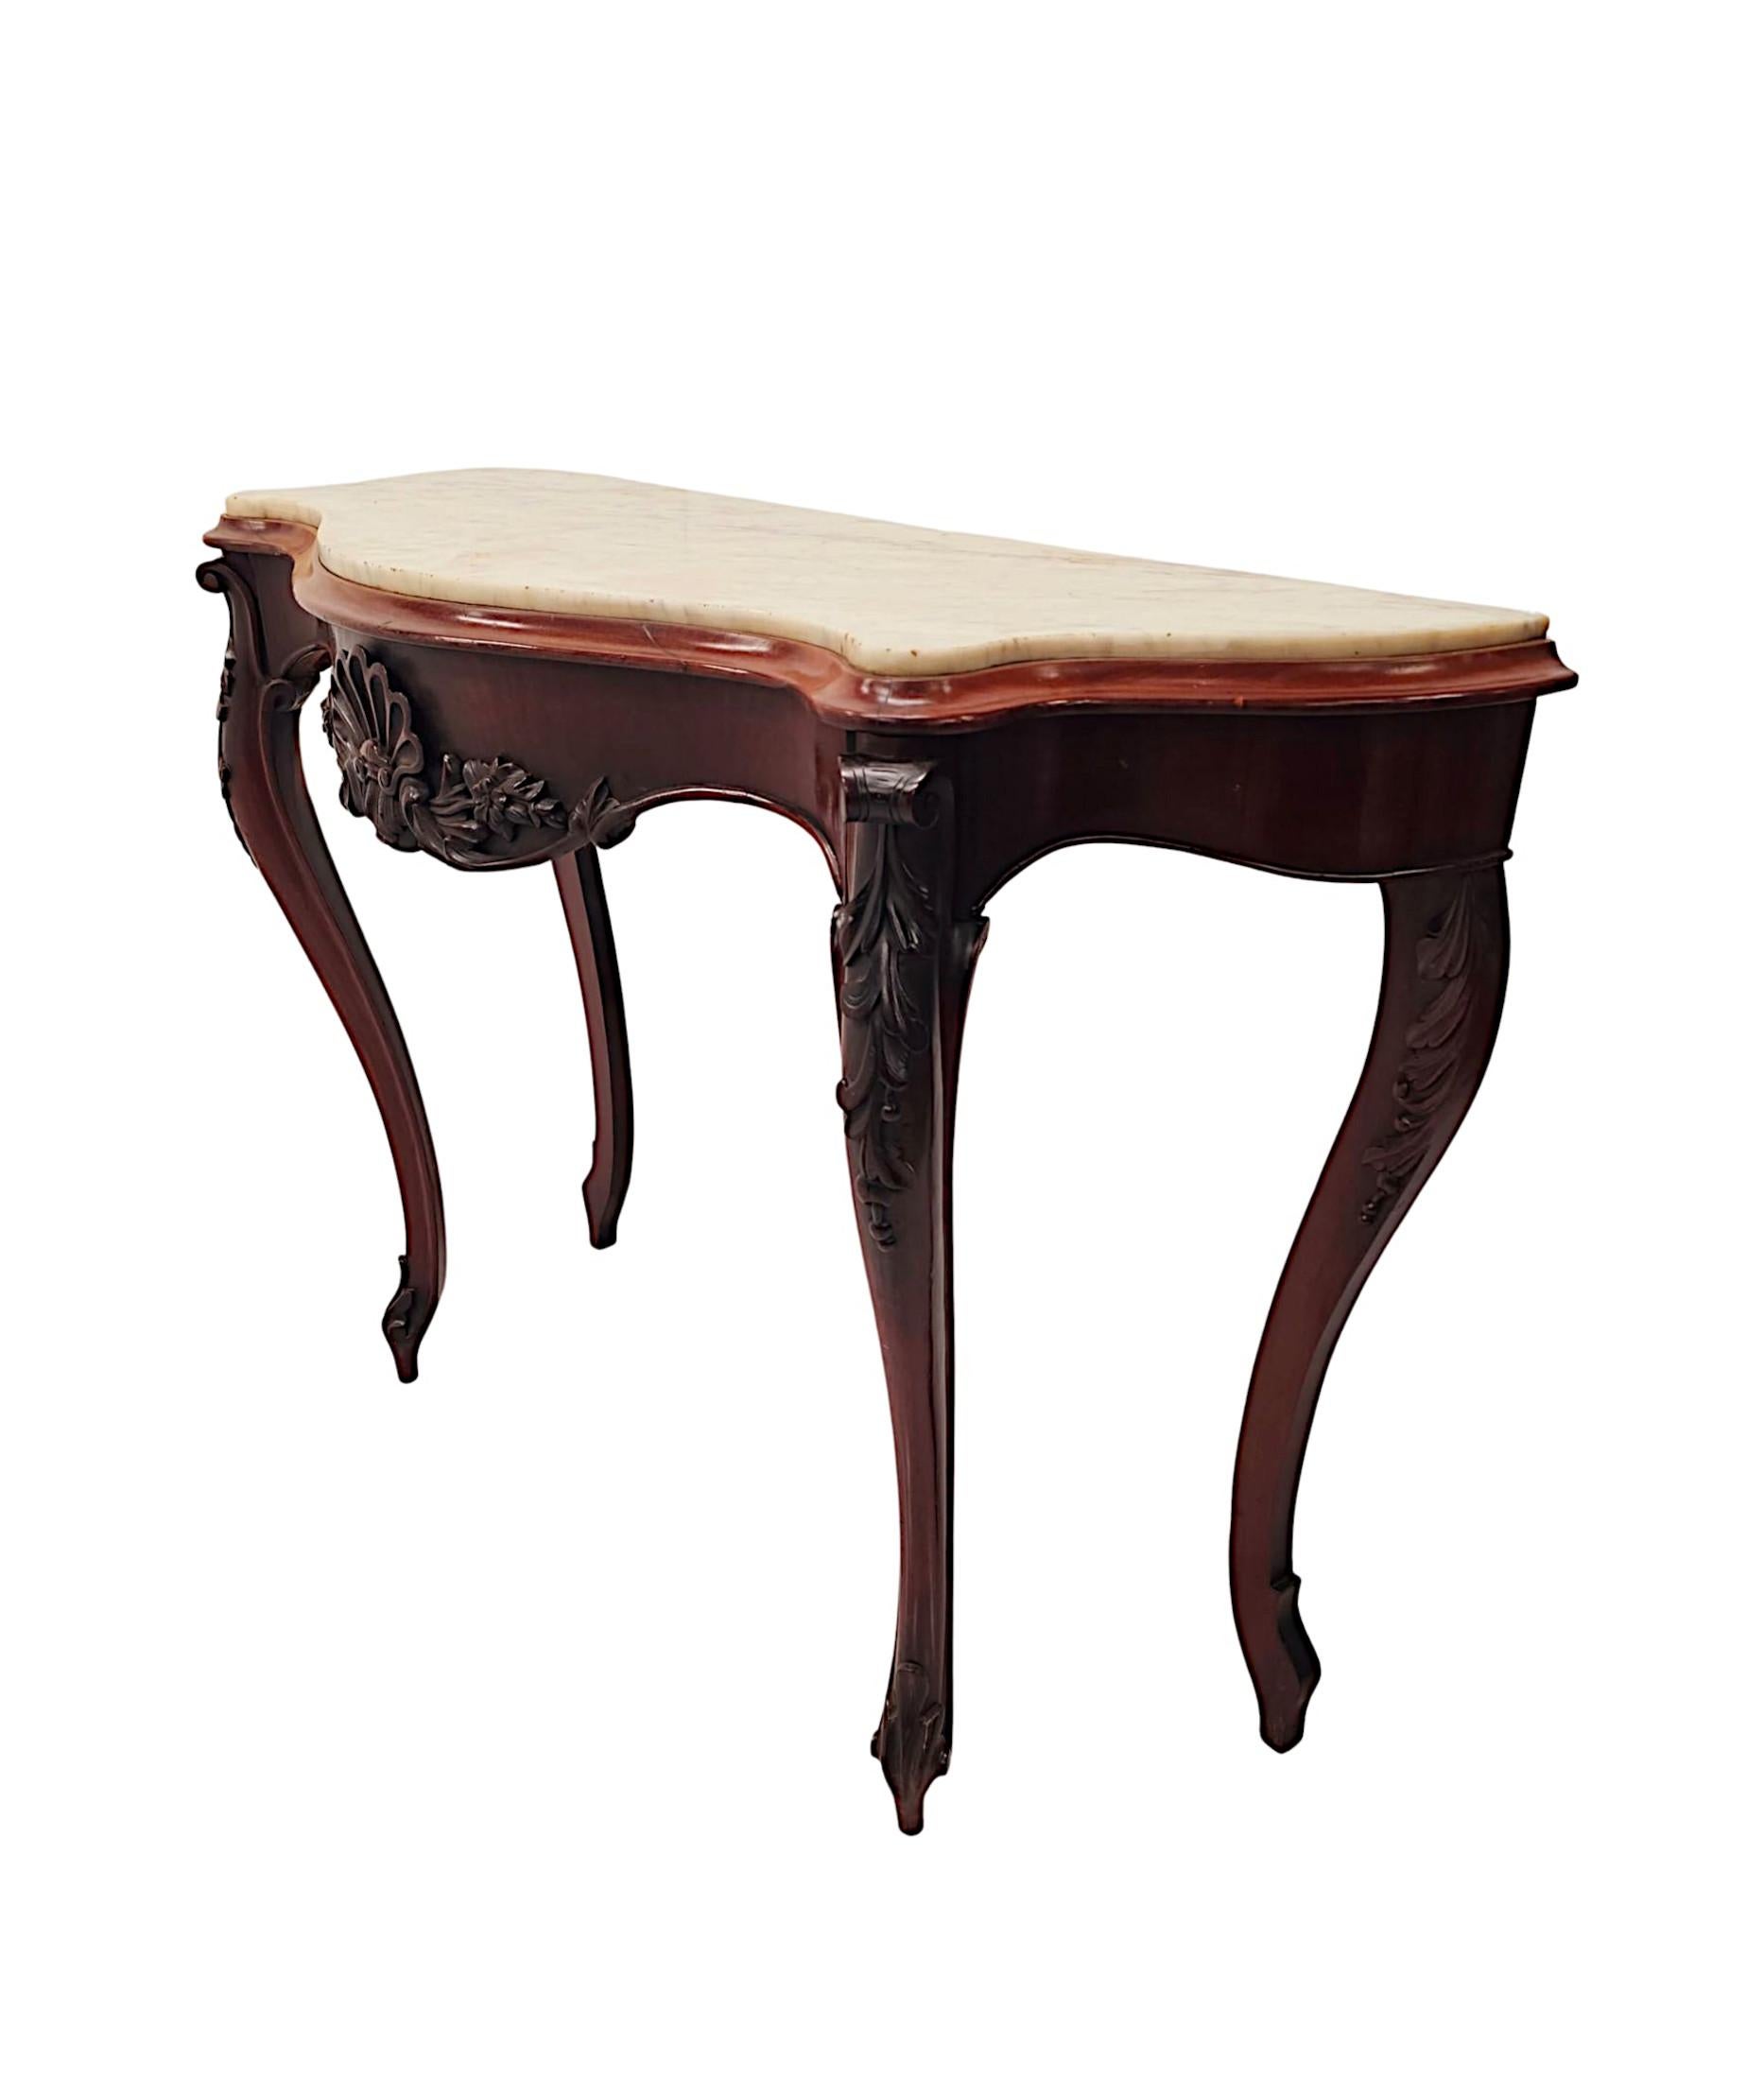 A very rare pair of 19th Century mahogany marble top console tables, of exceptional quality, superbly hand carved and richly patinated with fine grain.  The gorgeous, moulded white Carrara serpentine marble top of rectangular form is raised over a